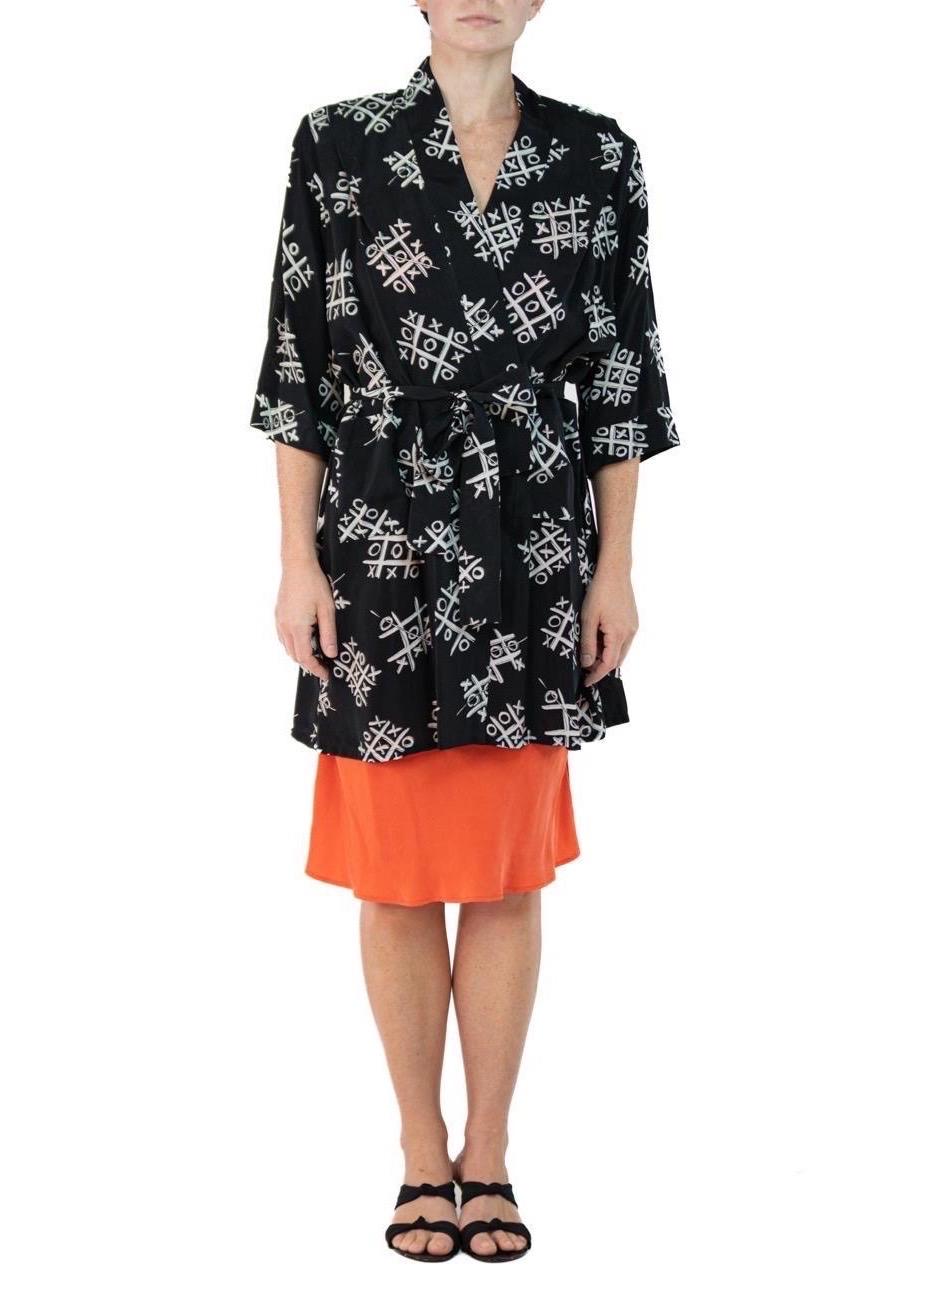 Morphew Collection Black & White Tic Tac Toe Novelty Print Cold Rayon Bias Belted Kimono 
MORPHEW COLLECTION is made entirely by hand in our NYC Ateliér of rare antique materials sourced from around the globe. Our sustainable vintage materials